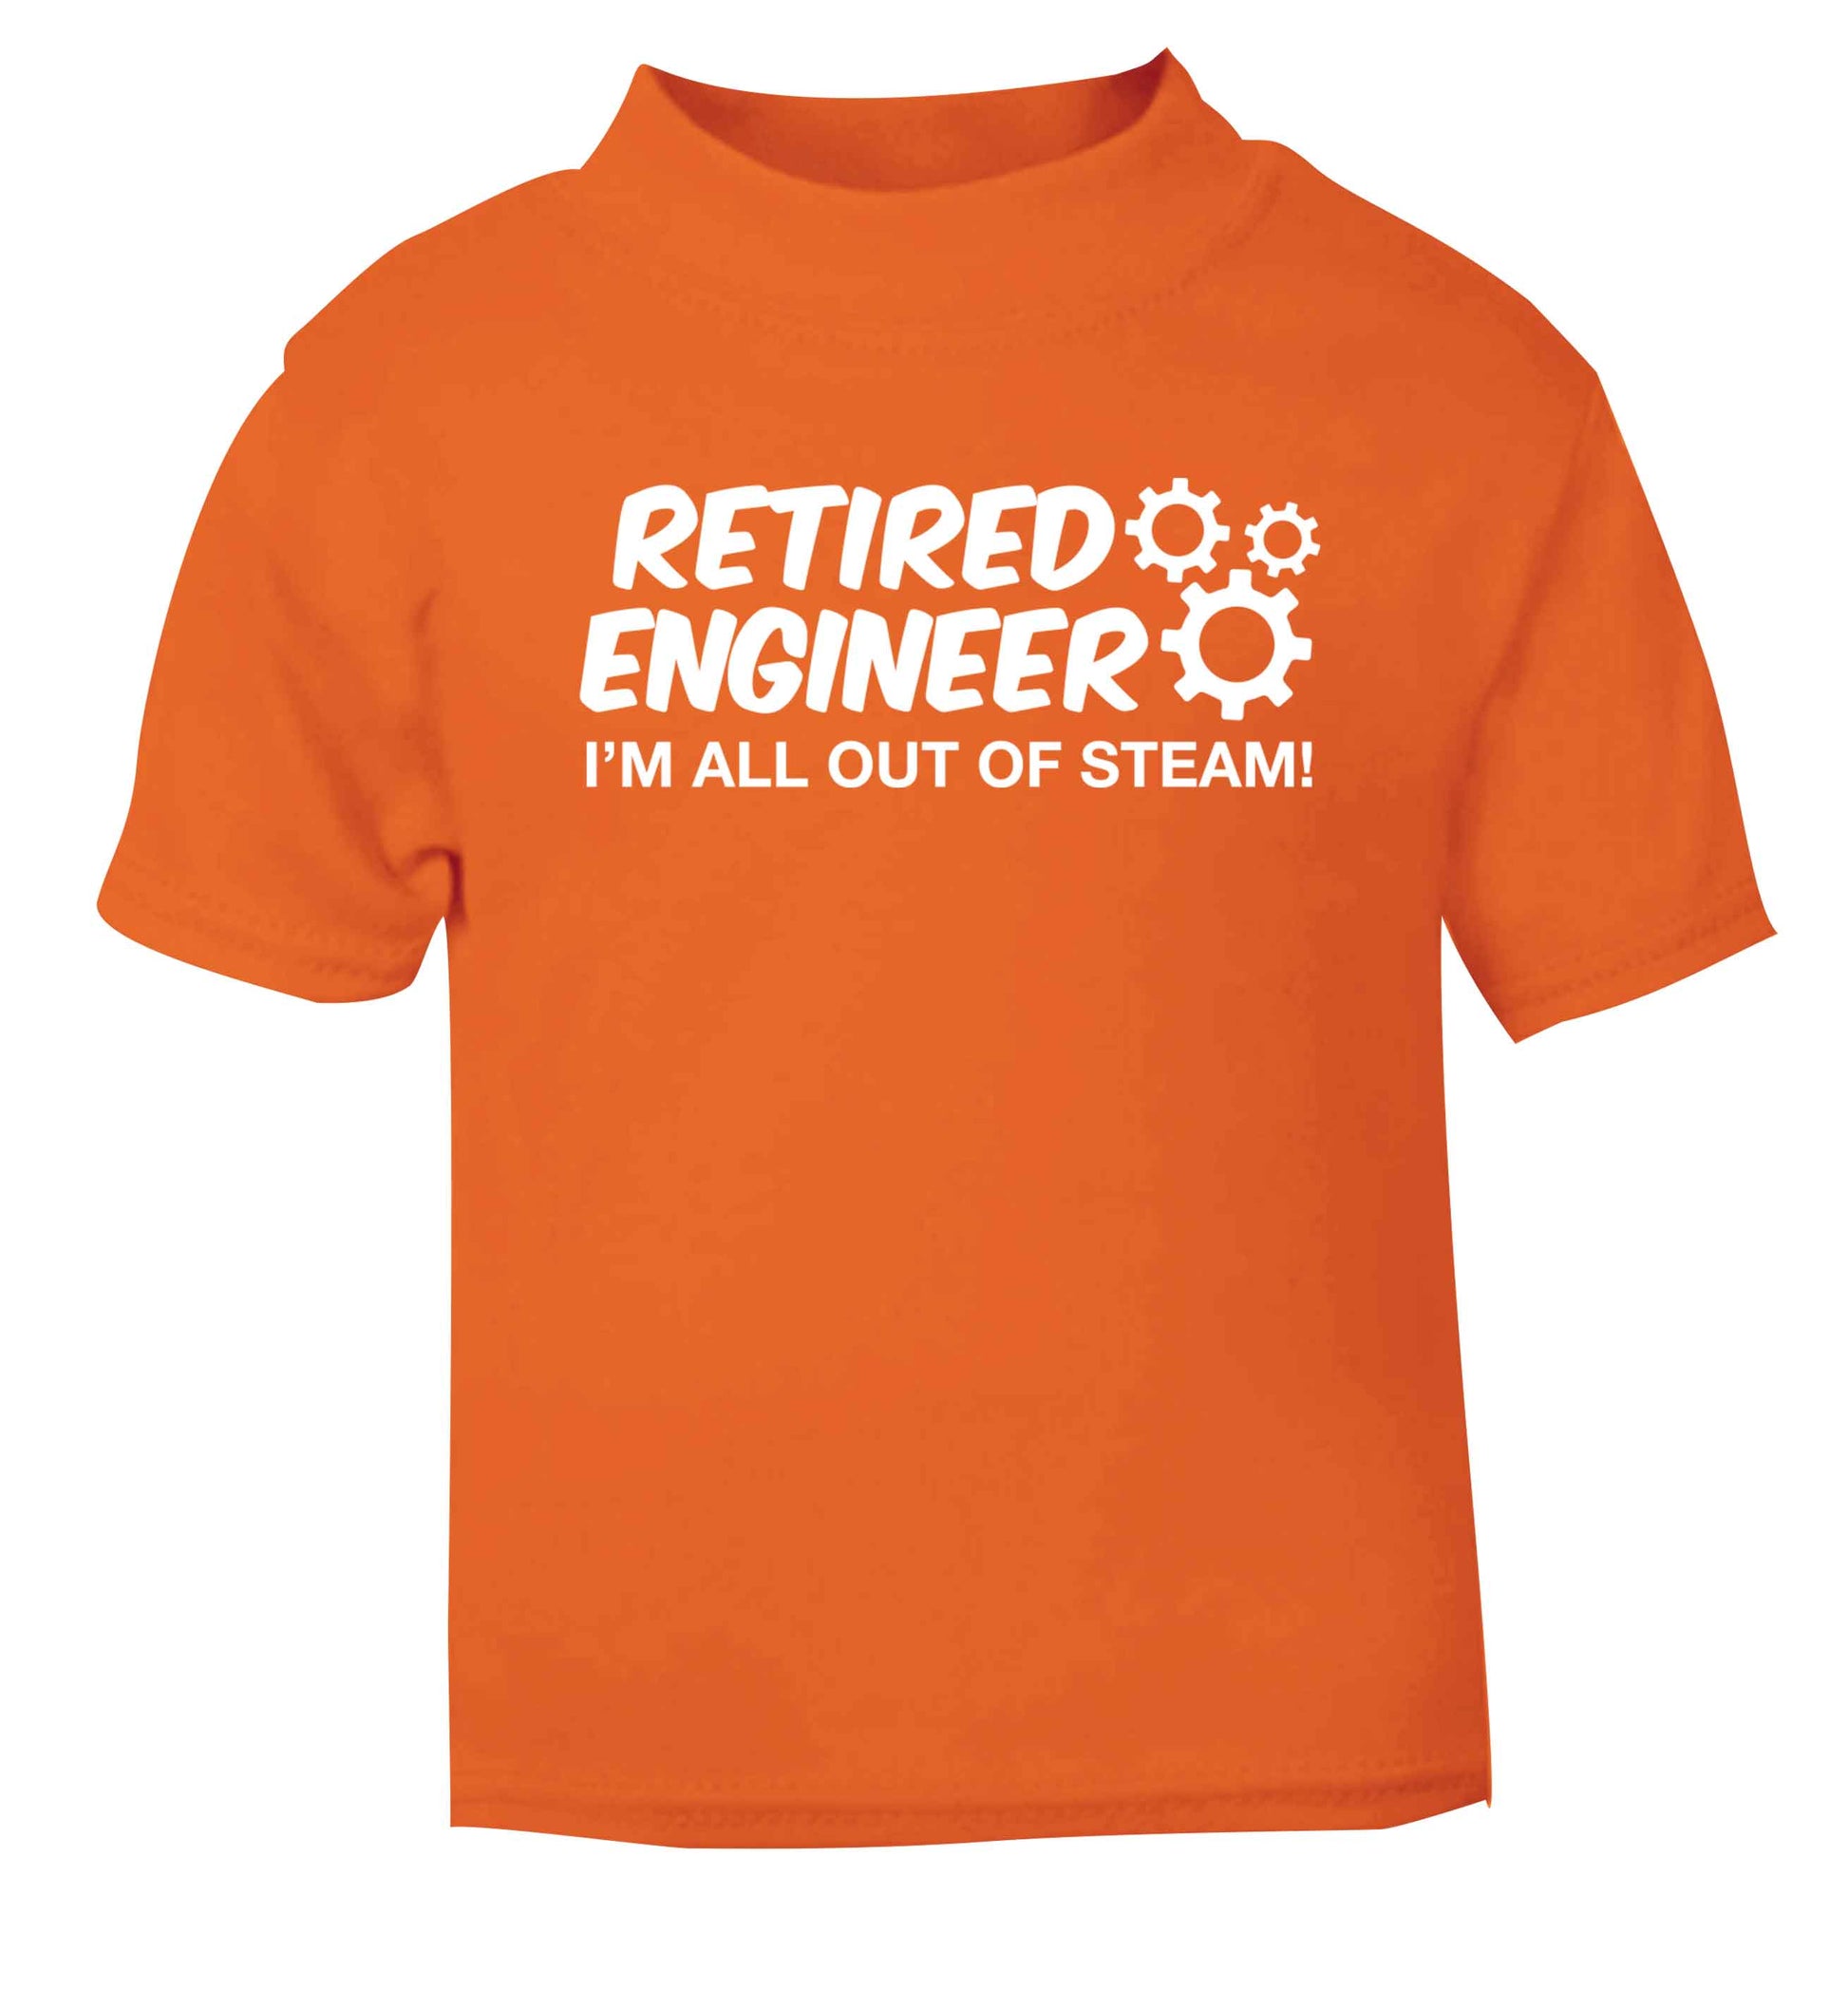 Retired engineer I'm all out of steam orange Baby Toddler Tshirt 2 Years